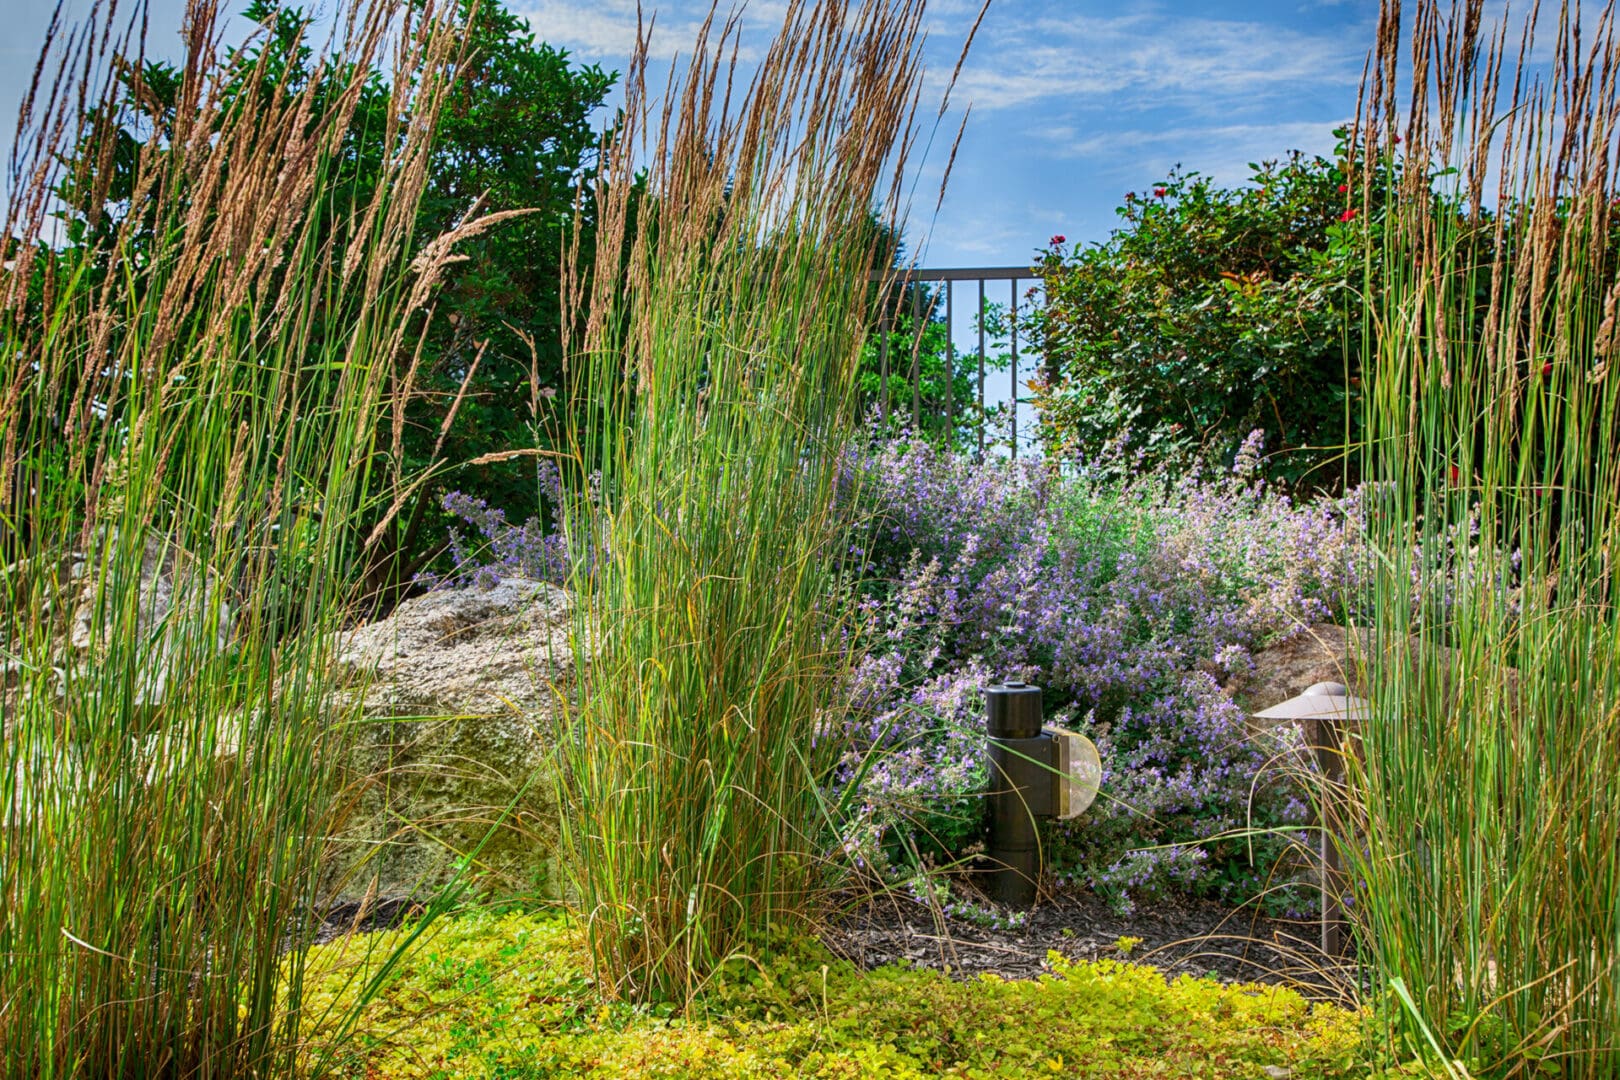 A fenced in area with tall grasses and flowers designed by Planting Professionals.